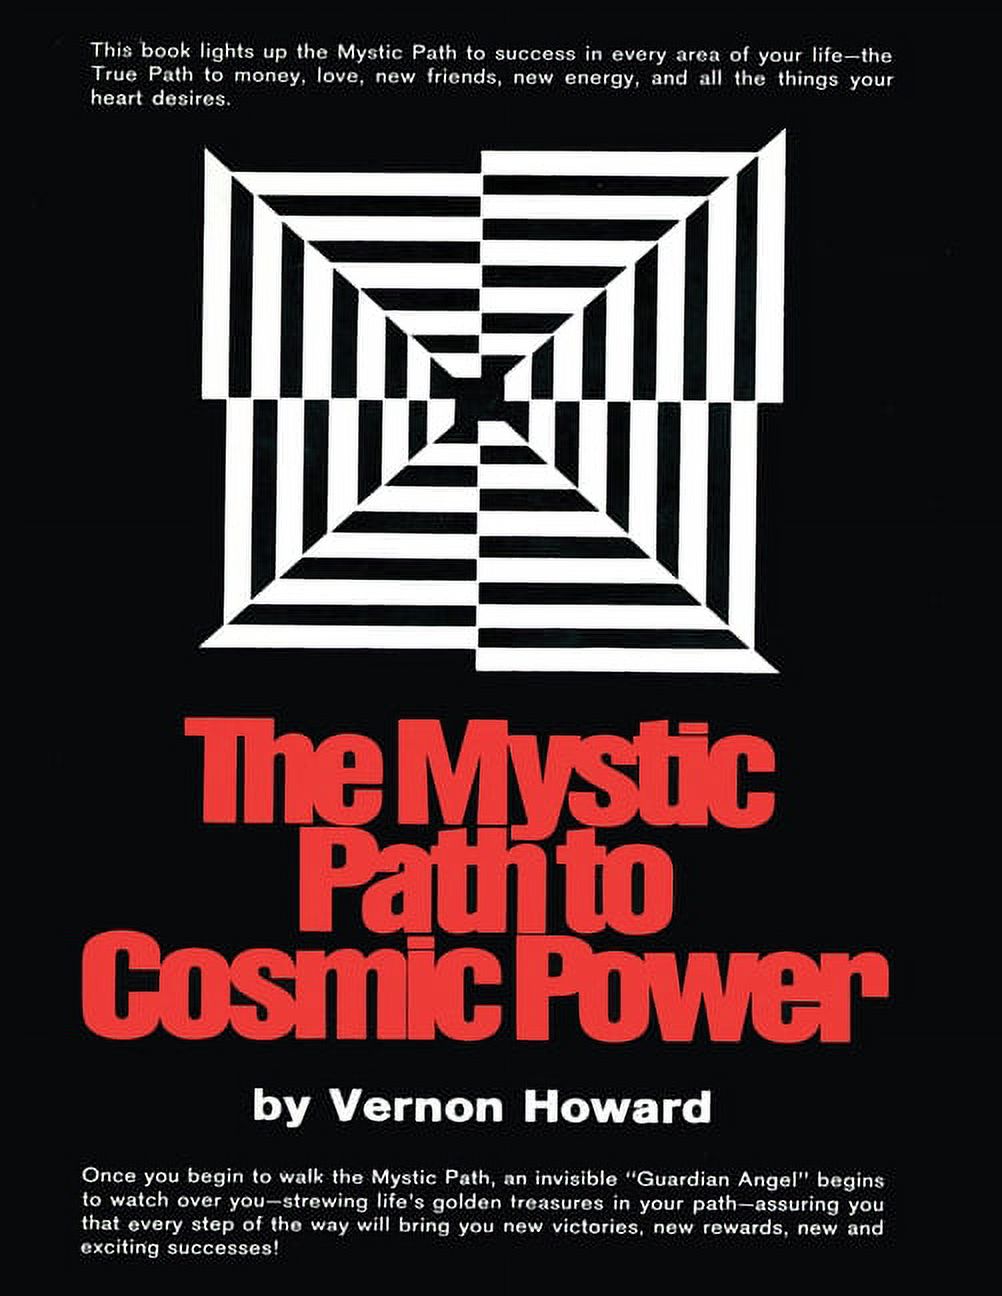 The Mystic Path to Cosmic Power (Paperback) - image 1 of 1